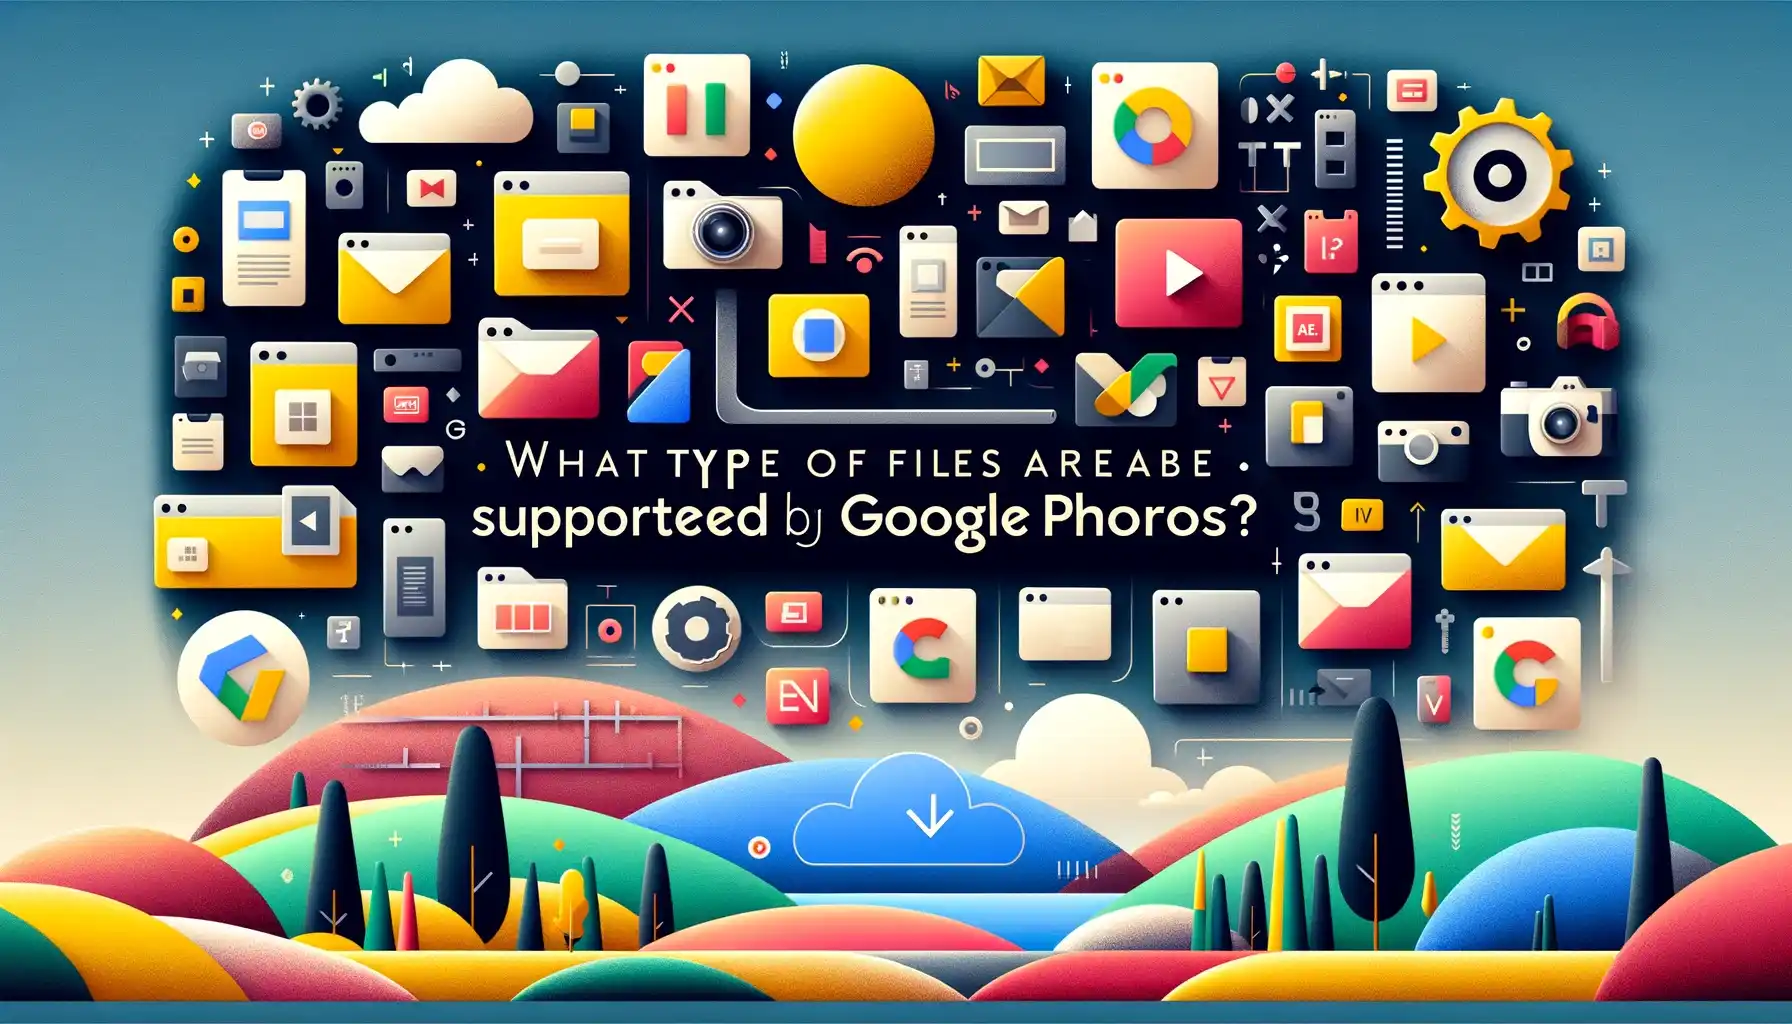 What Type of Files are Supported by Google Photos?